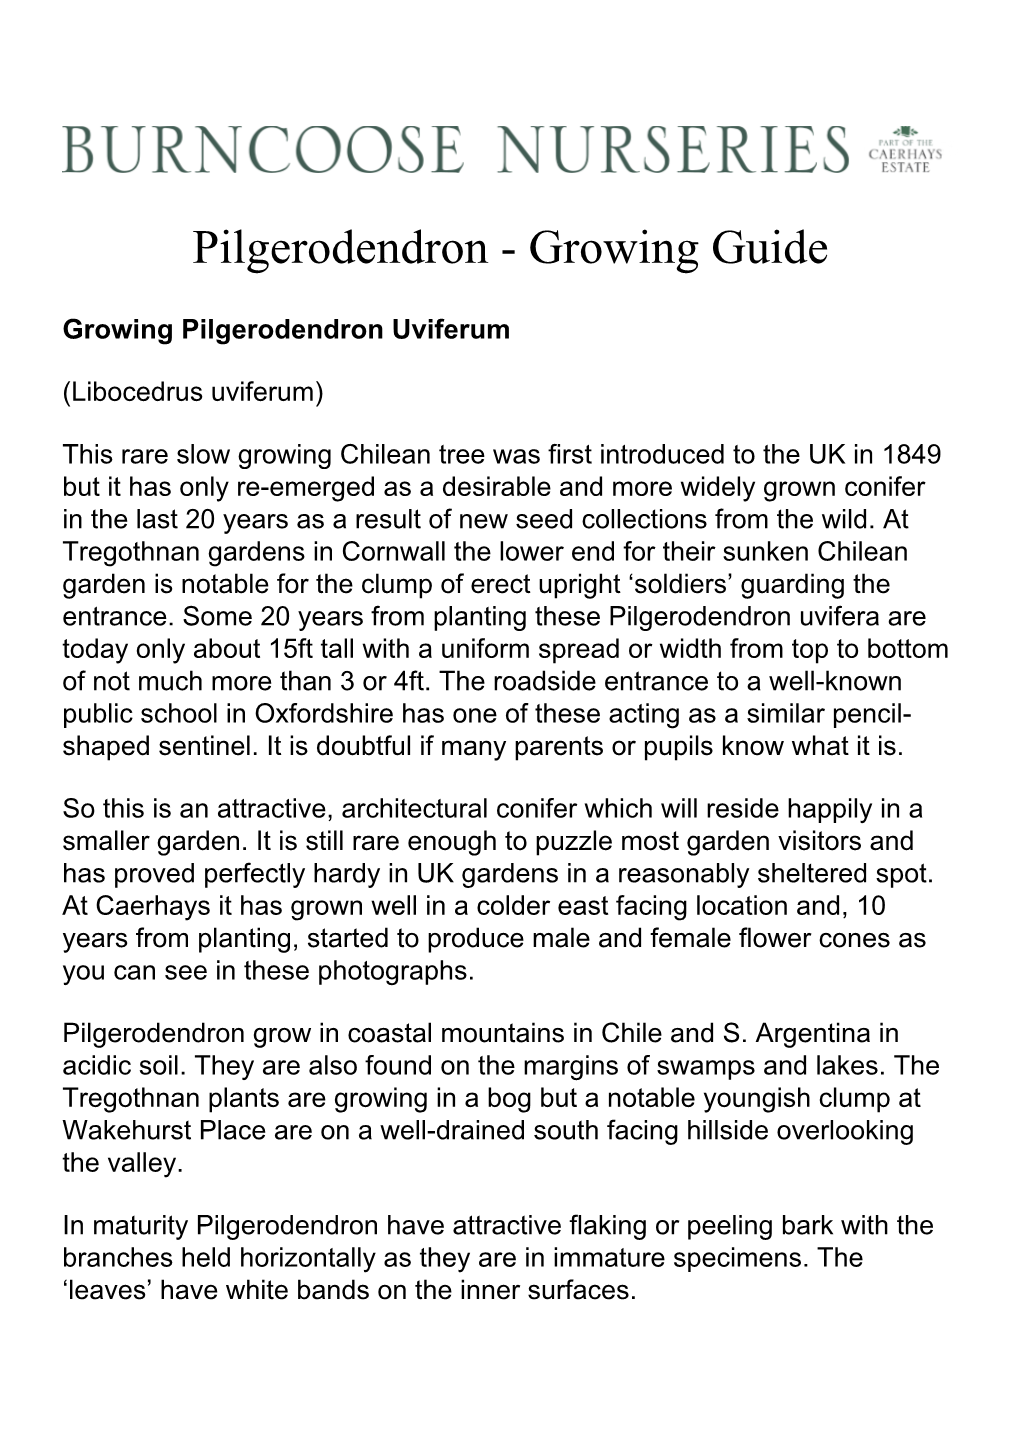 Pilgerodendron - Growing Guide